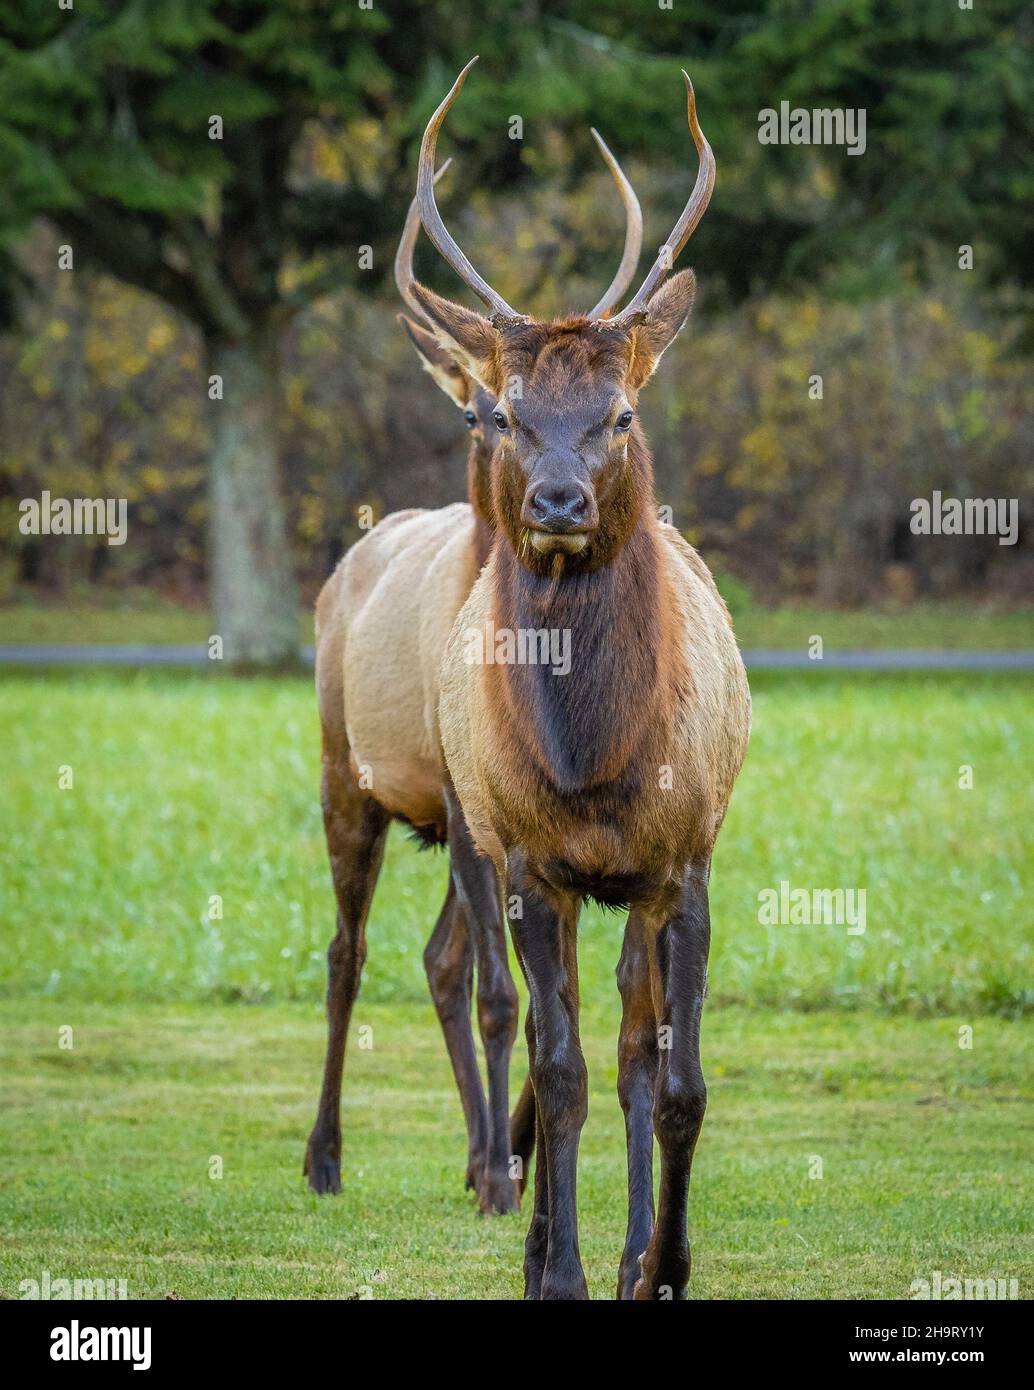 Two Elk or  Manitoban Elk sparring  near Oconaluftee Visitor Center in Great Smoky Mountains National Park in North Carolina USA Stock Photo